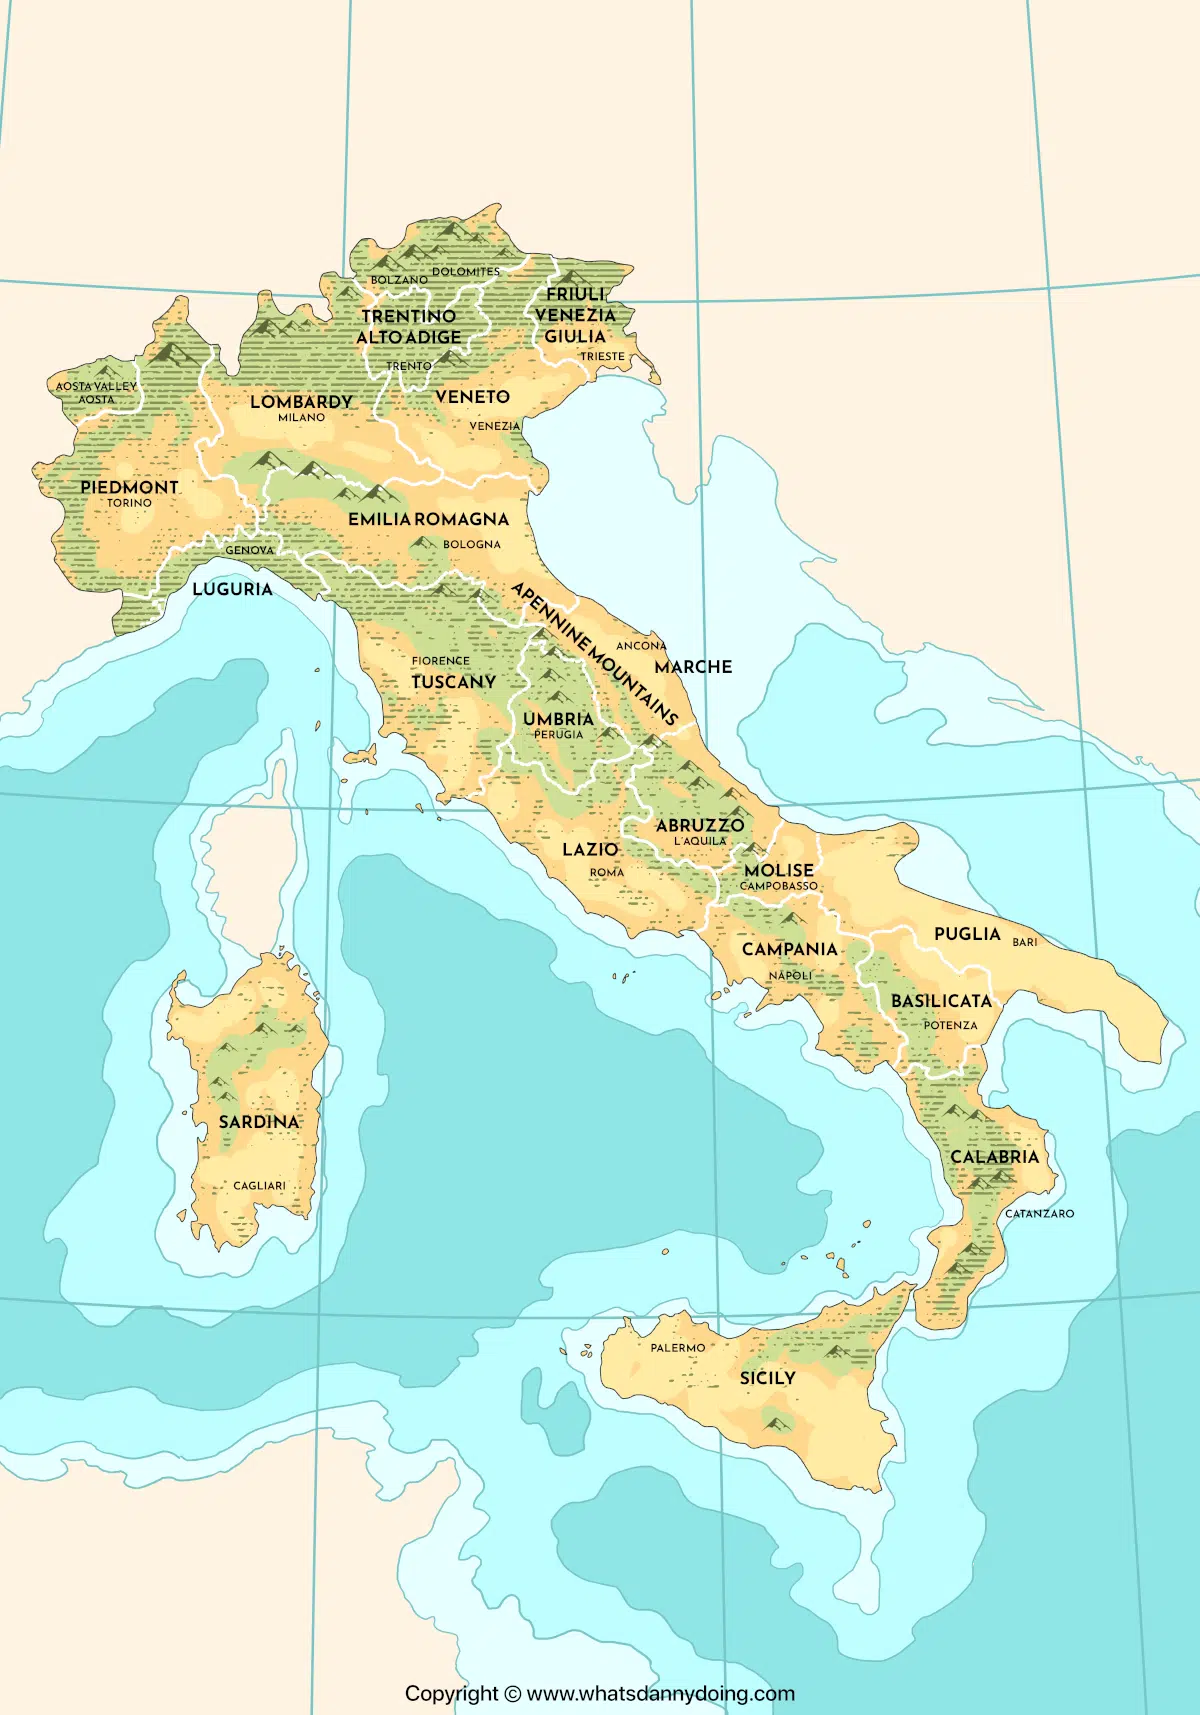 A simple map of Italy, showing its administrative regions and major cities.